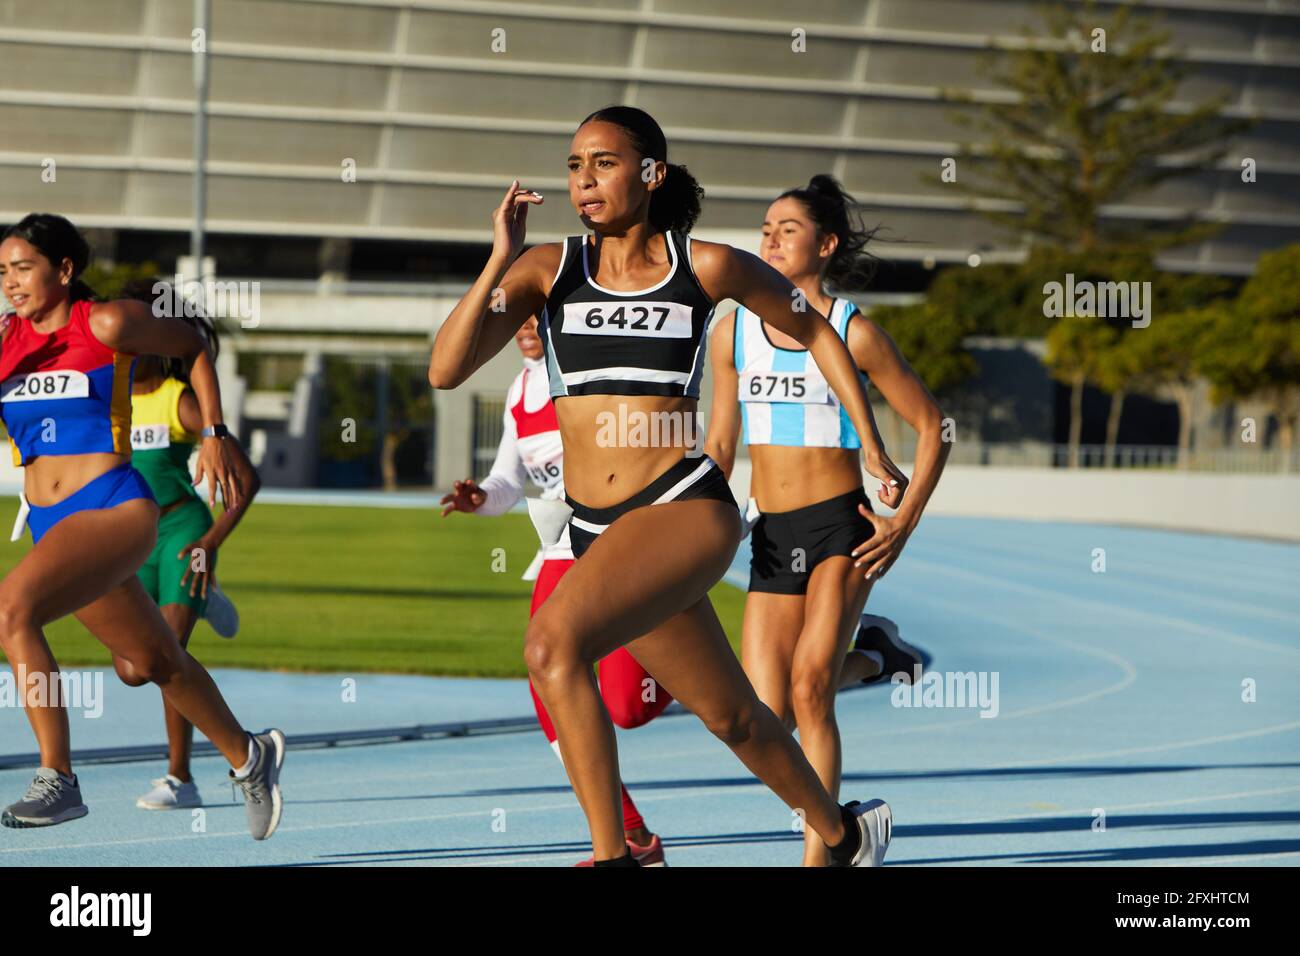 Female track and field athletes running in competition on race track Stock Photo